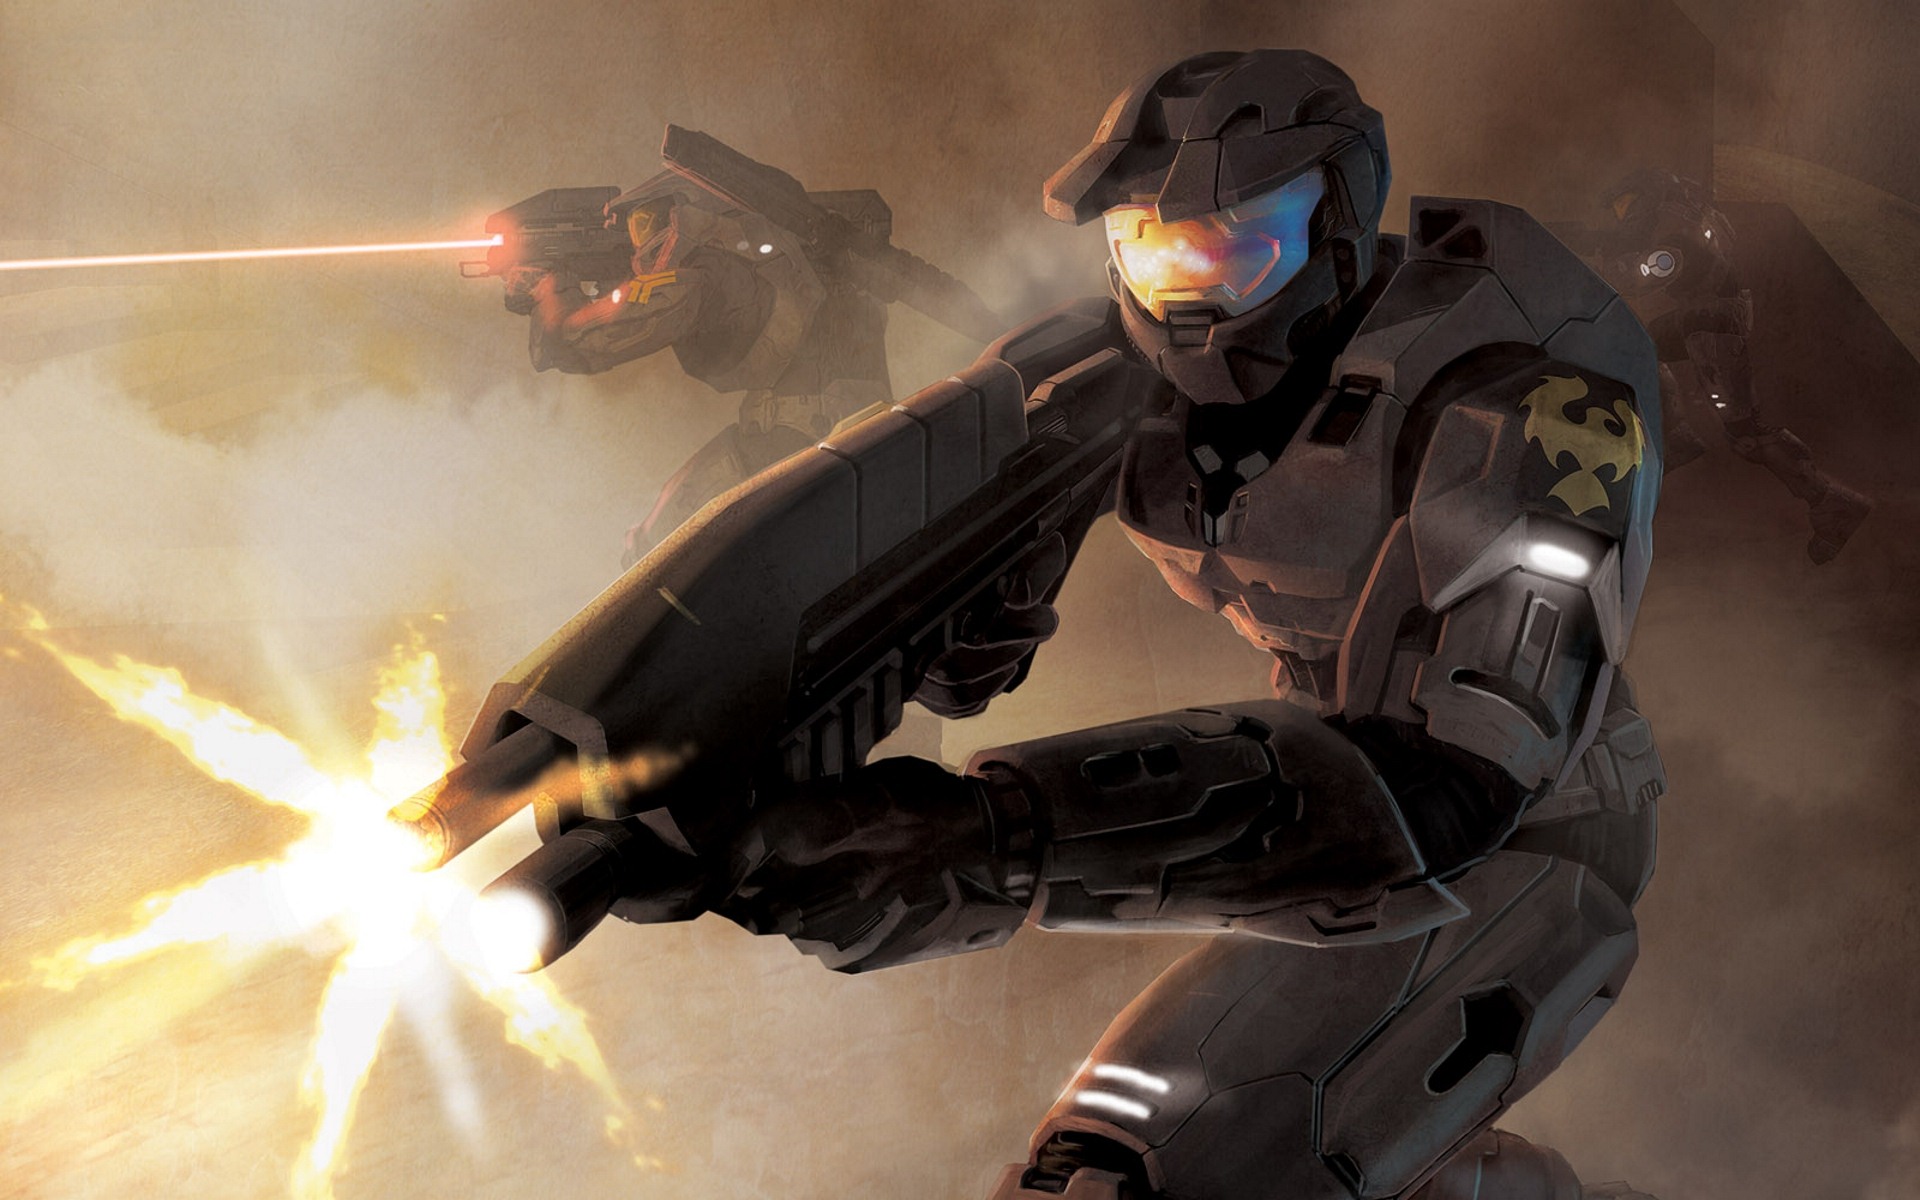 Halo game HD wallpapers #10 - 1920x1200